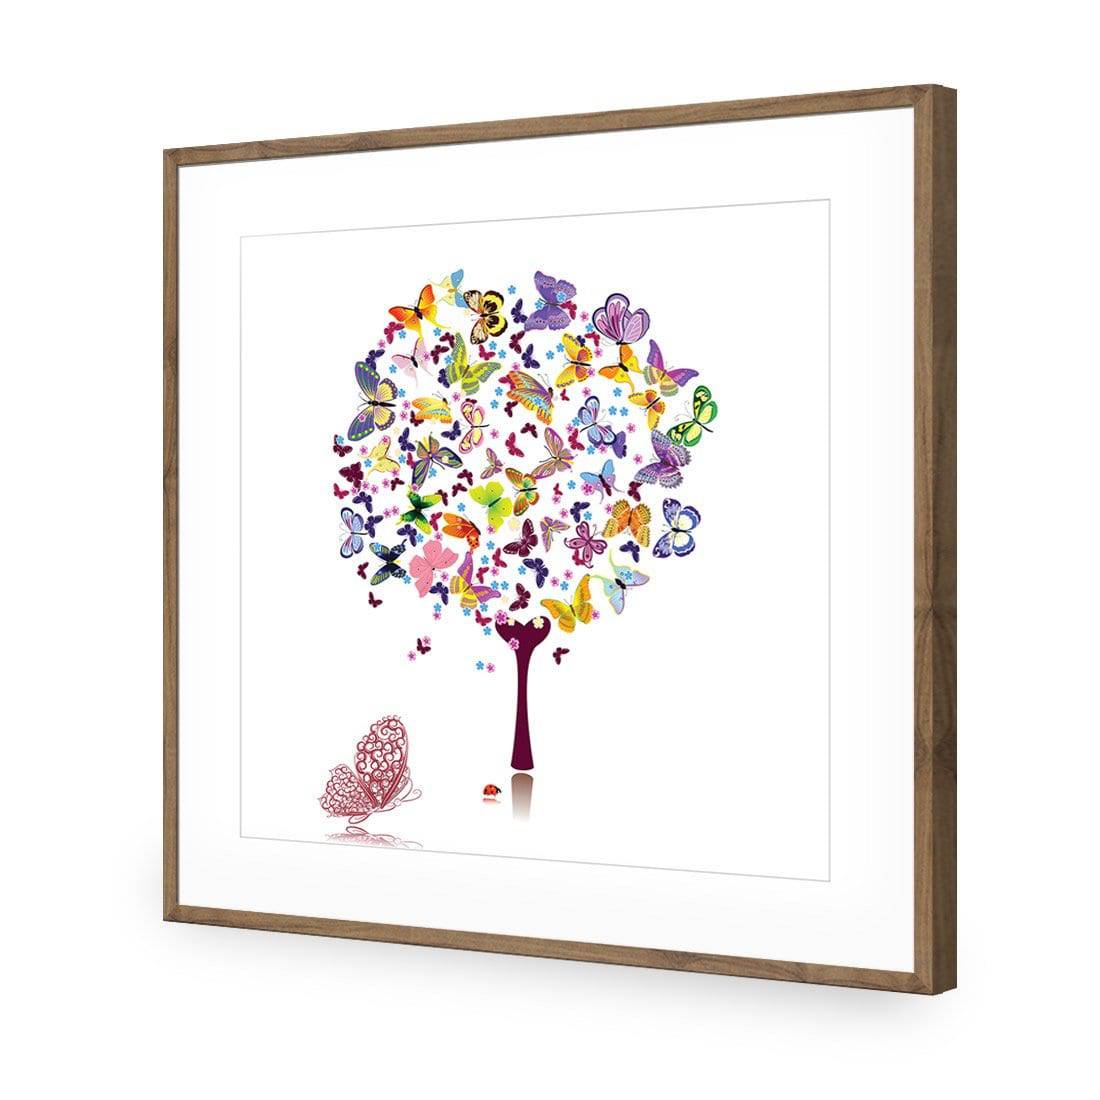 Day Dream Tree, Square-Acrylic-Wall Art Design-With Border-Acrylic - Natural Frame-37x37cm-Wall Art Designs